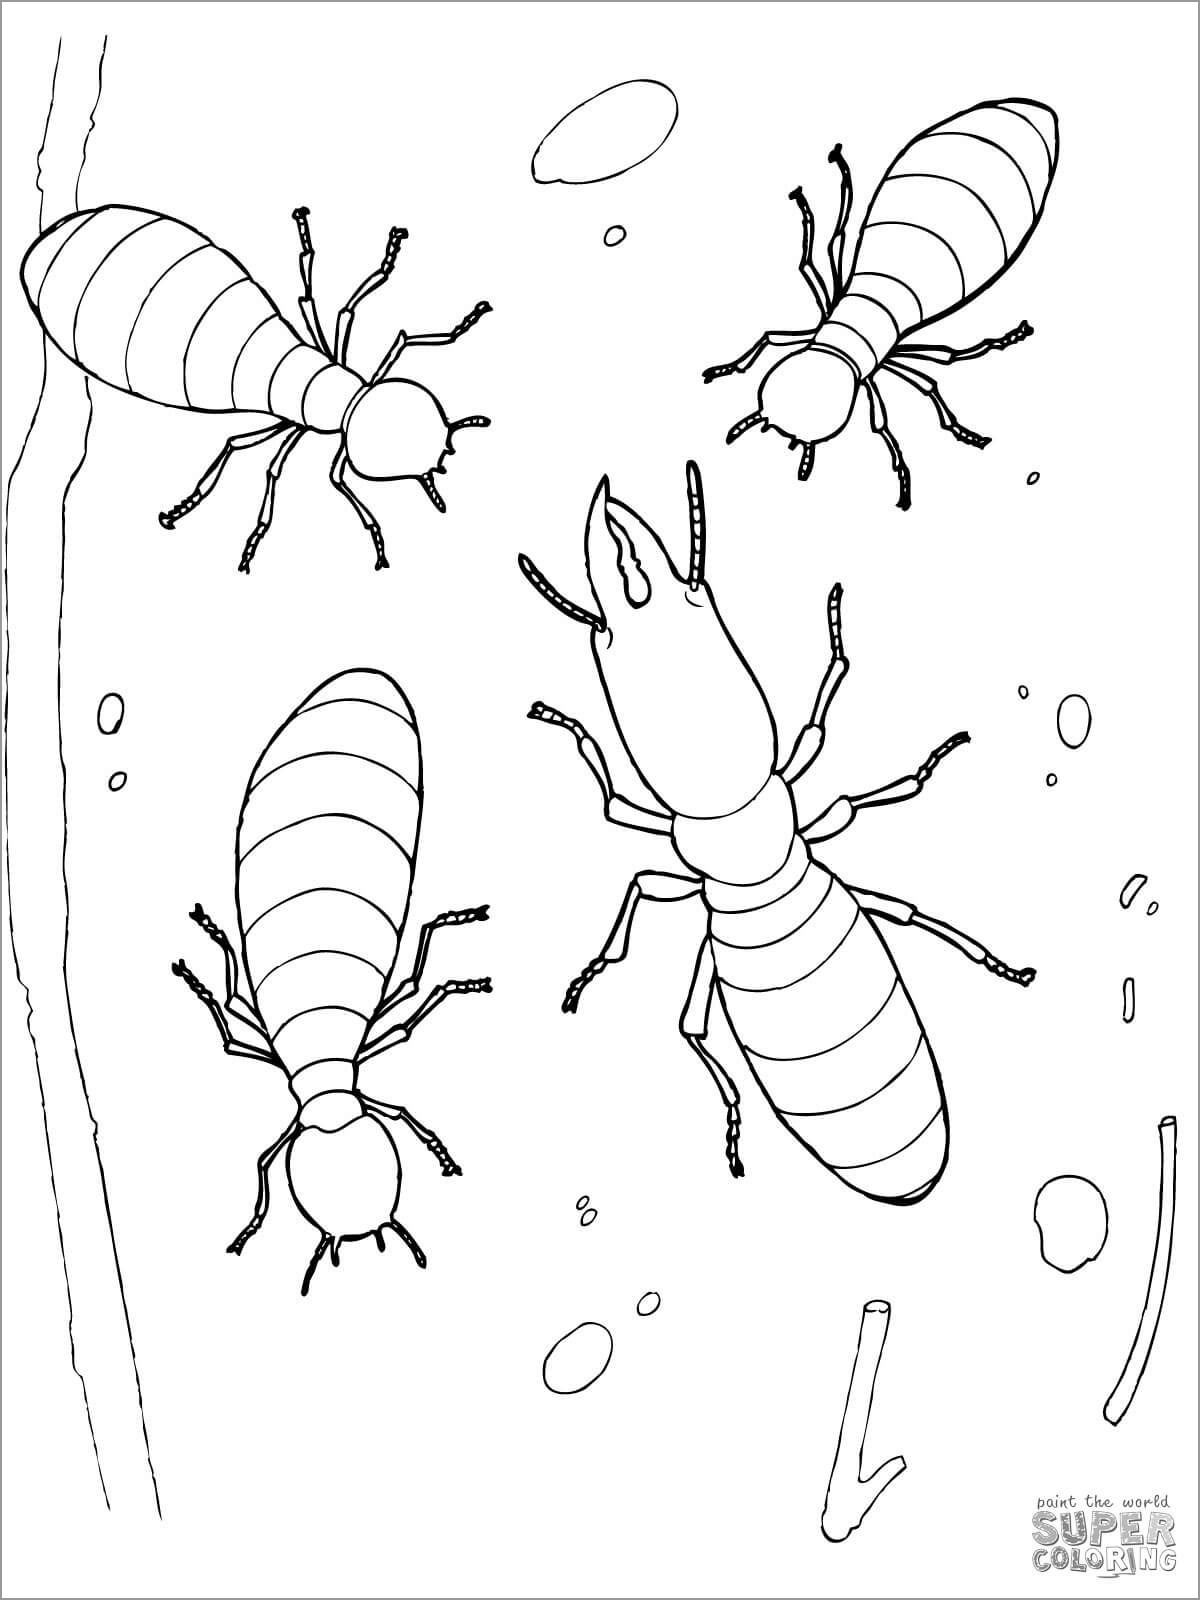 Termites Coloring Pages - ColoringBay